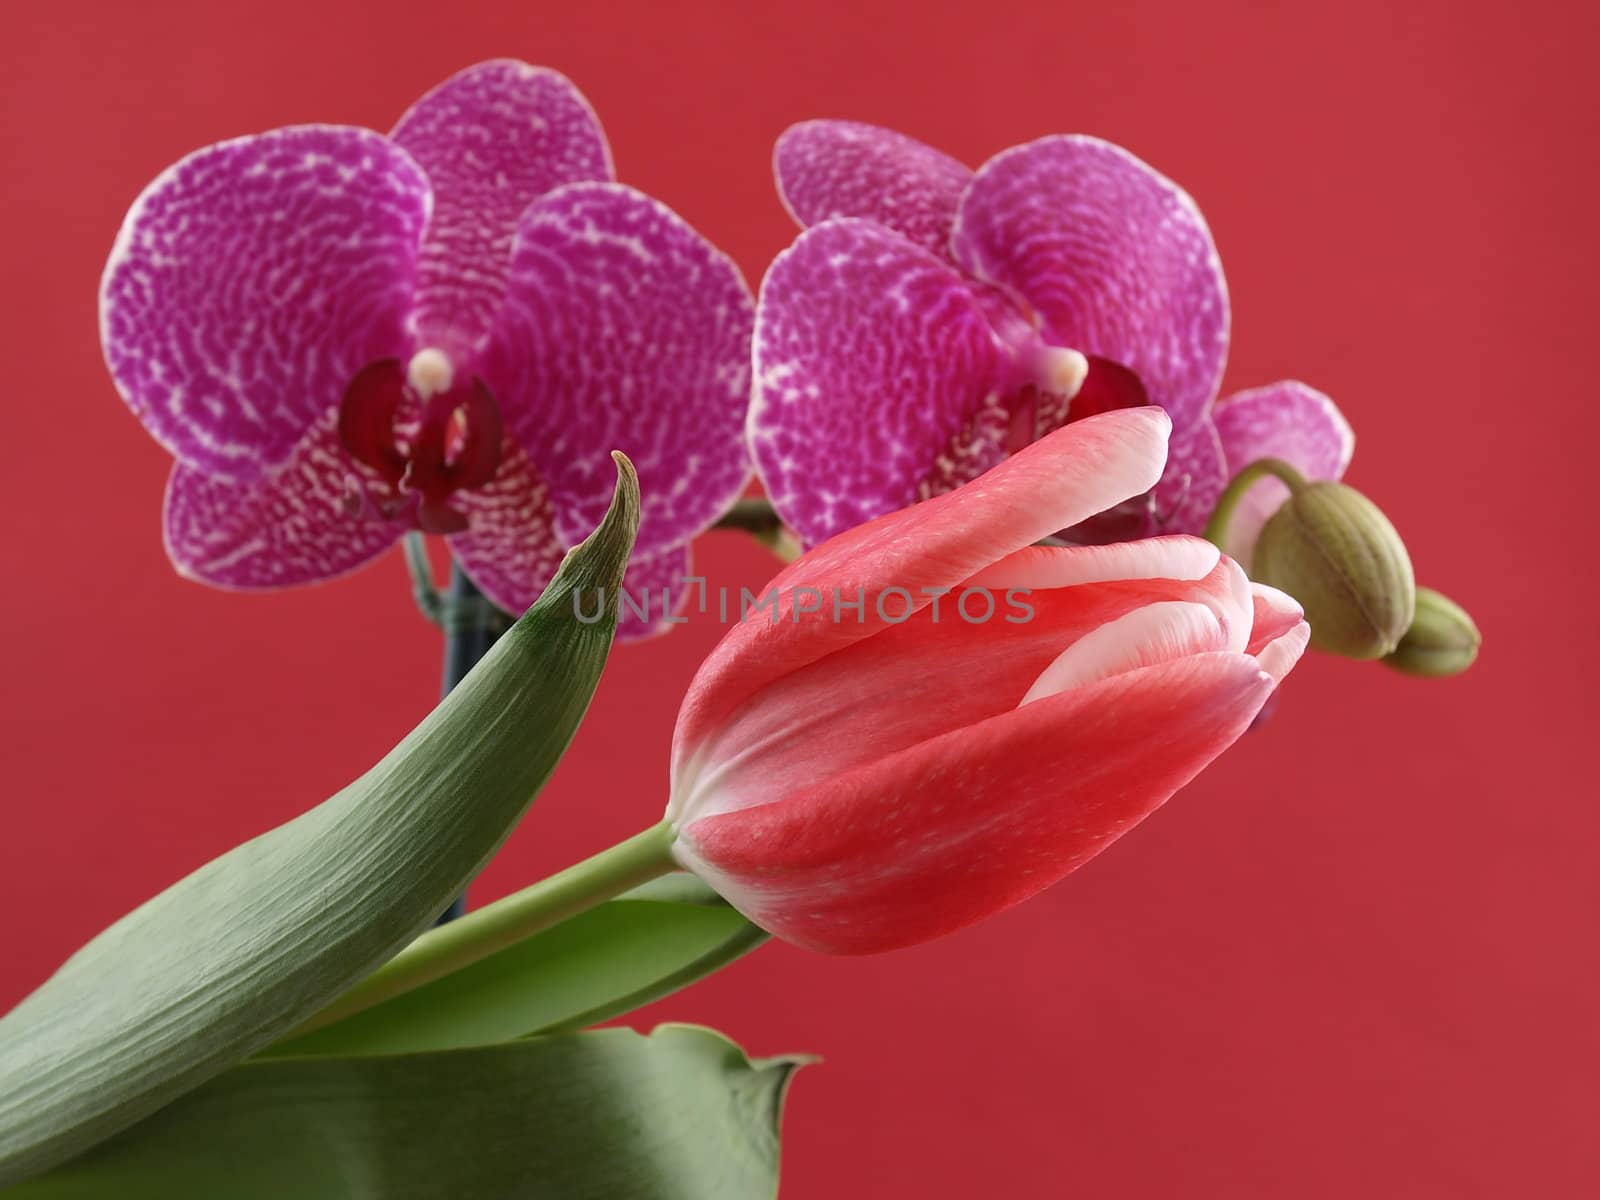 A beautiful pink tulip in front of purple orchid blooms contrasting over a red background.